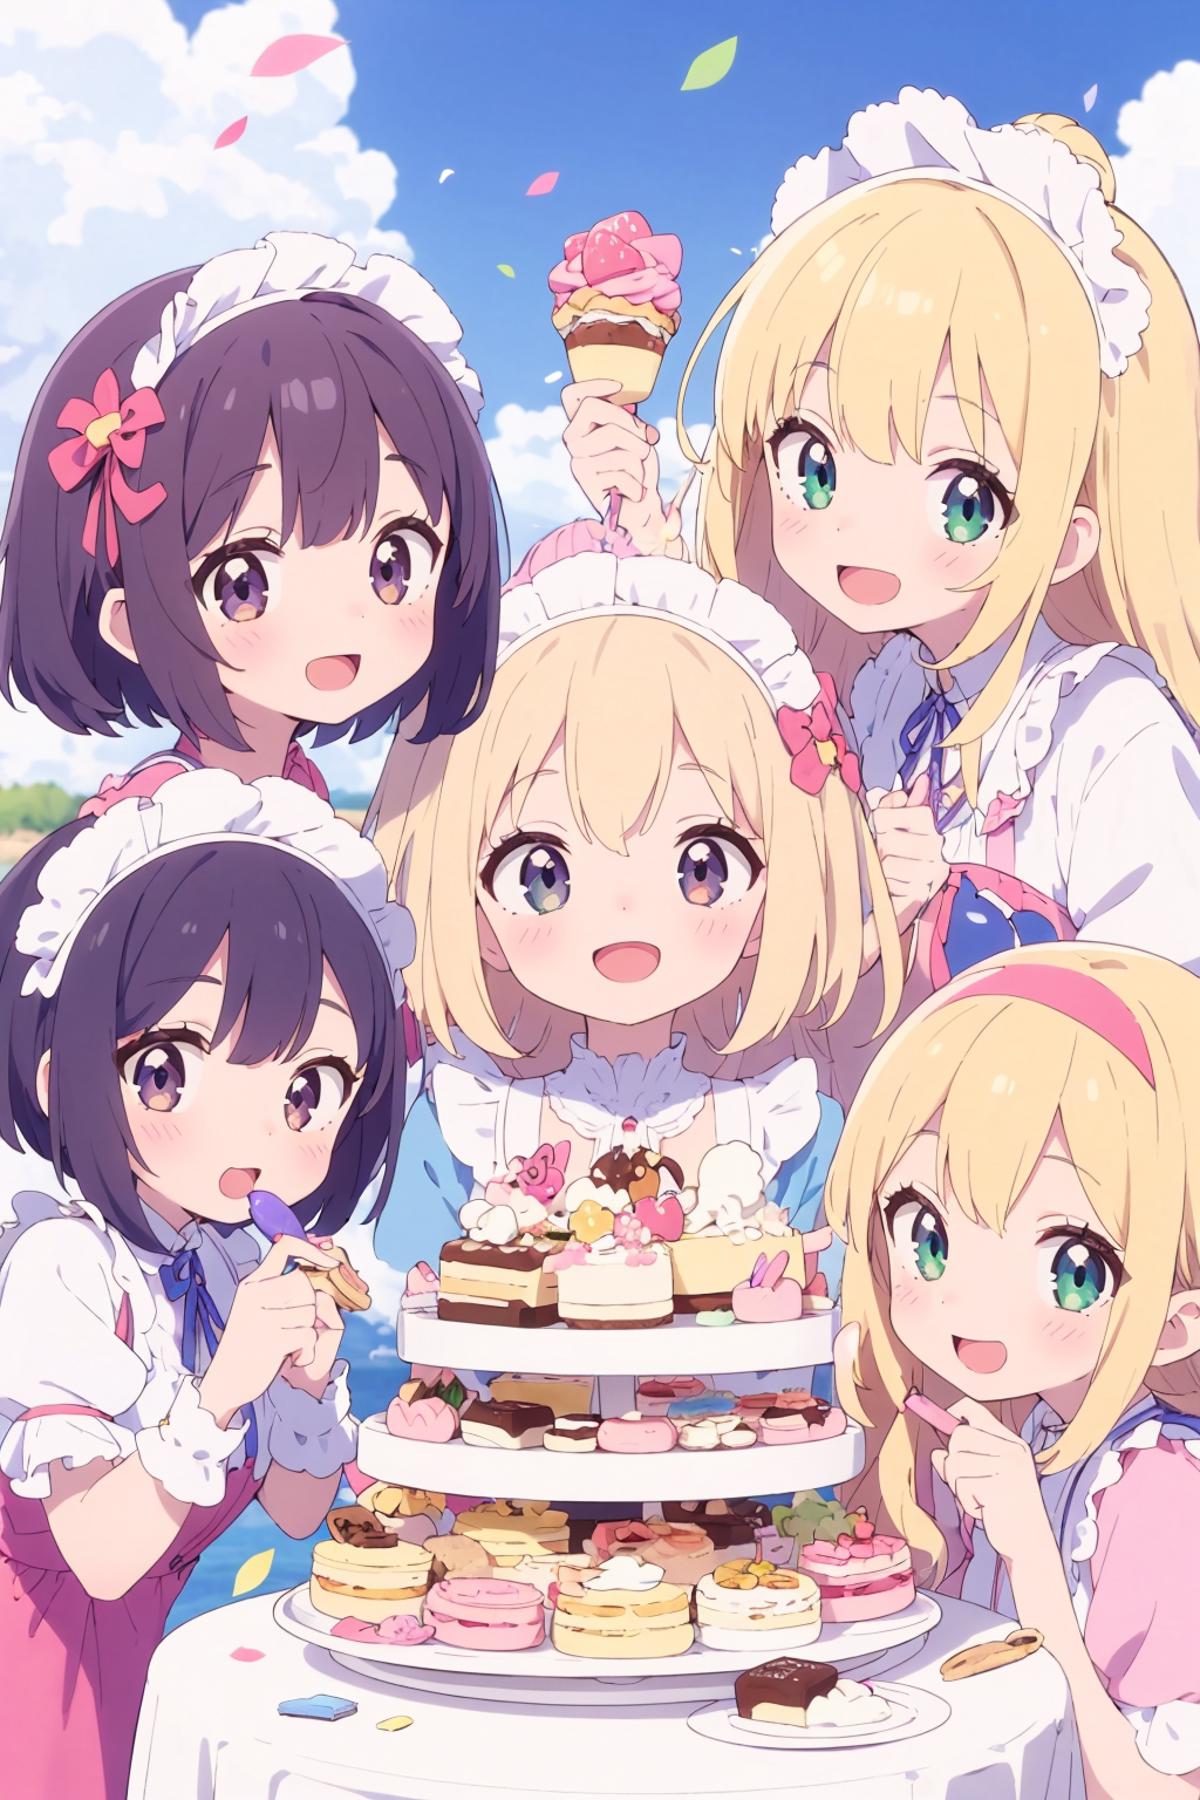 A group of smiling anime girls with ties are standing around a cake.